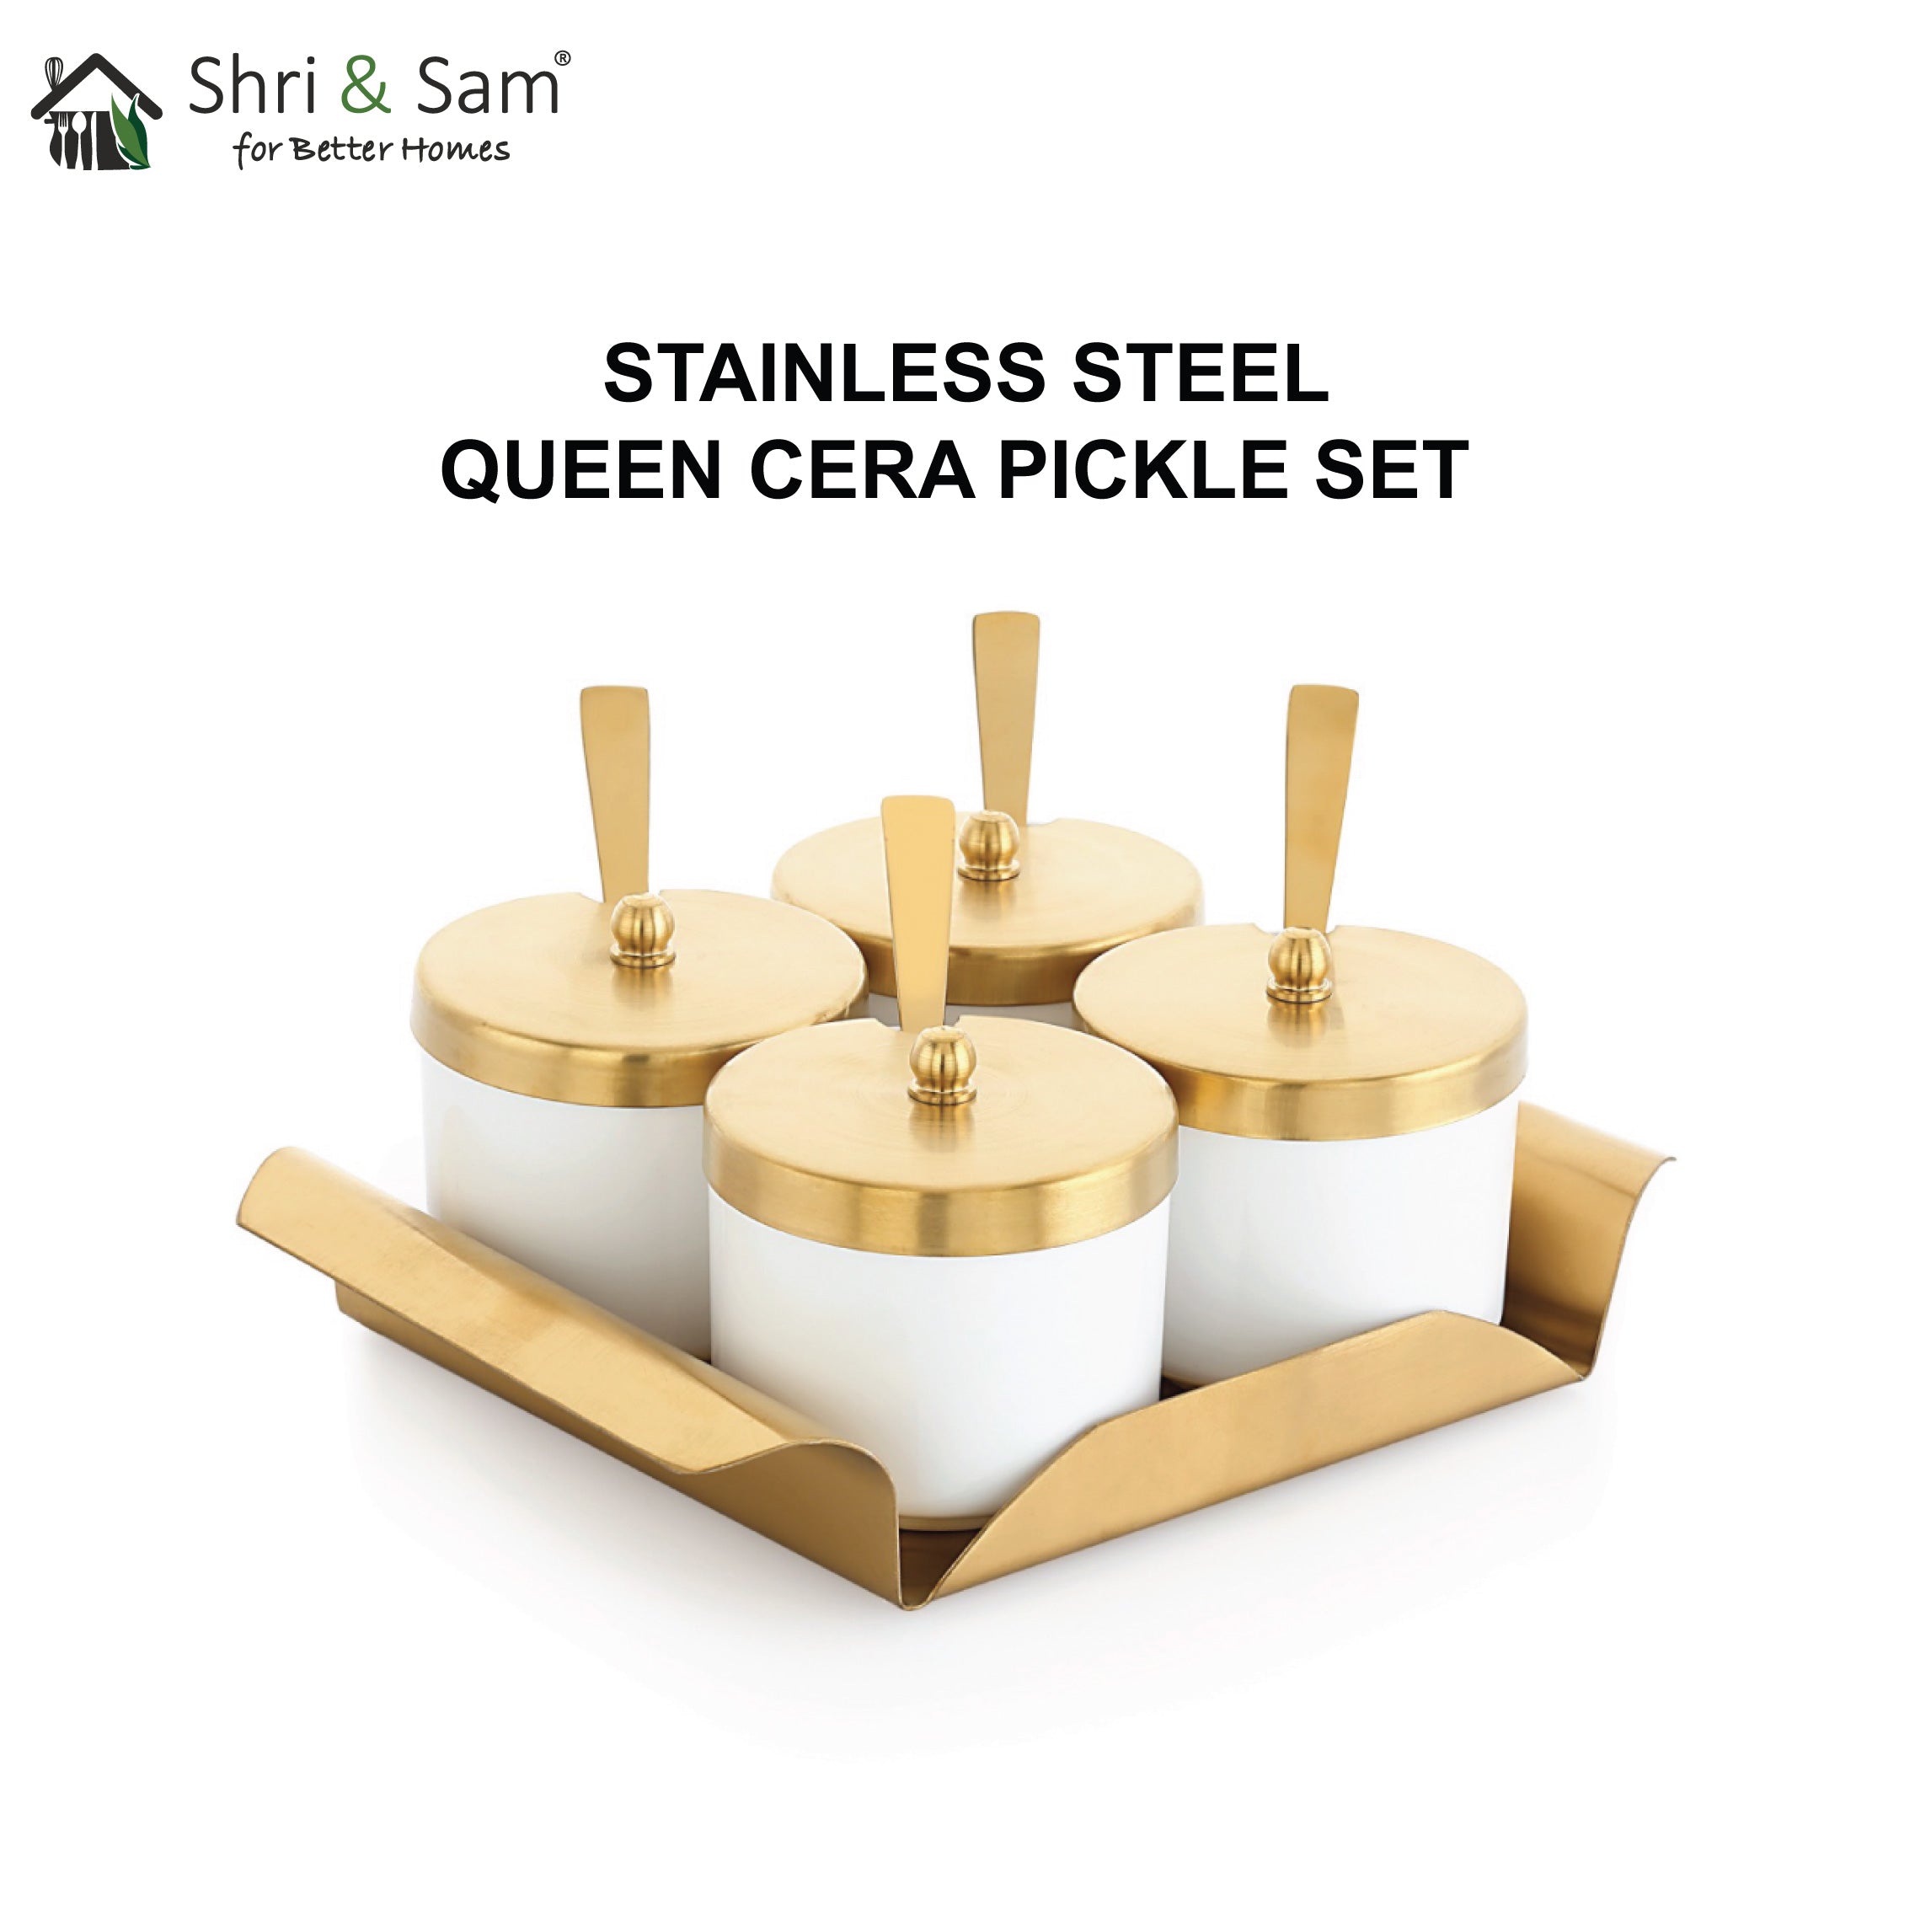 Stainless Steel 4 PCS Queen Cera Pickle Set